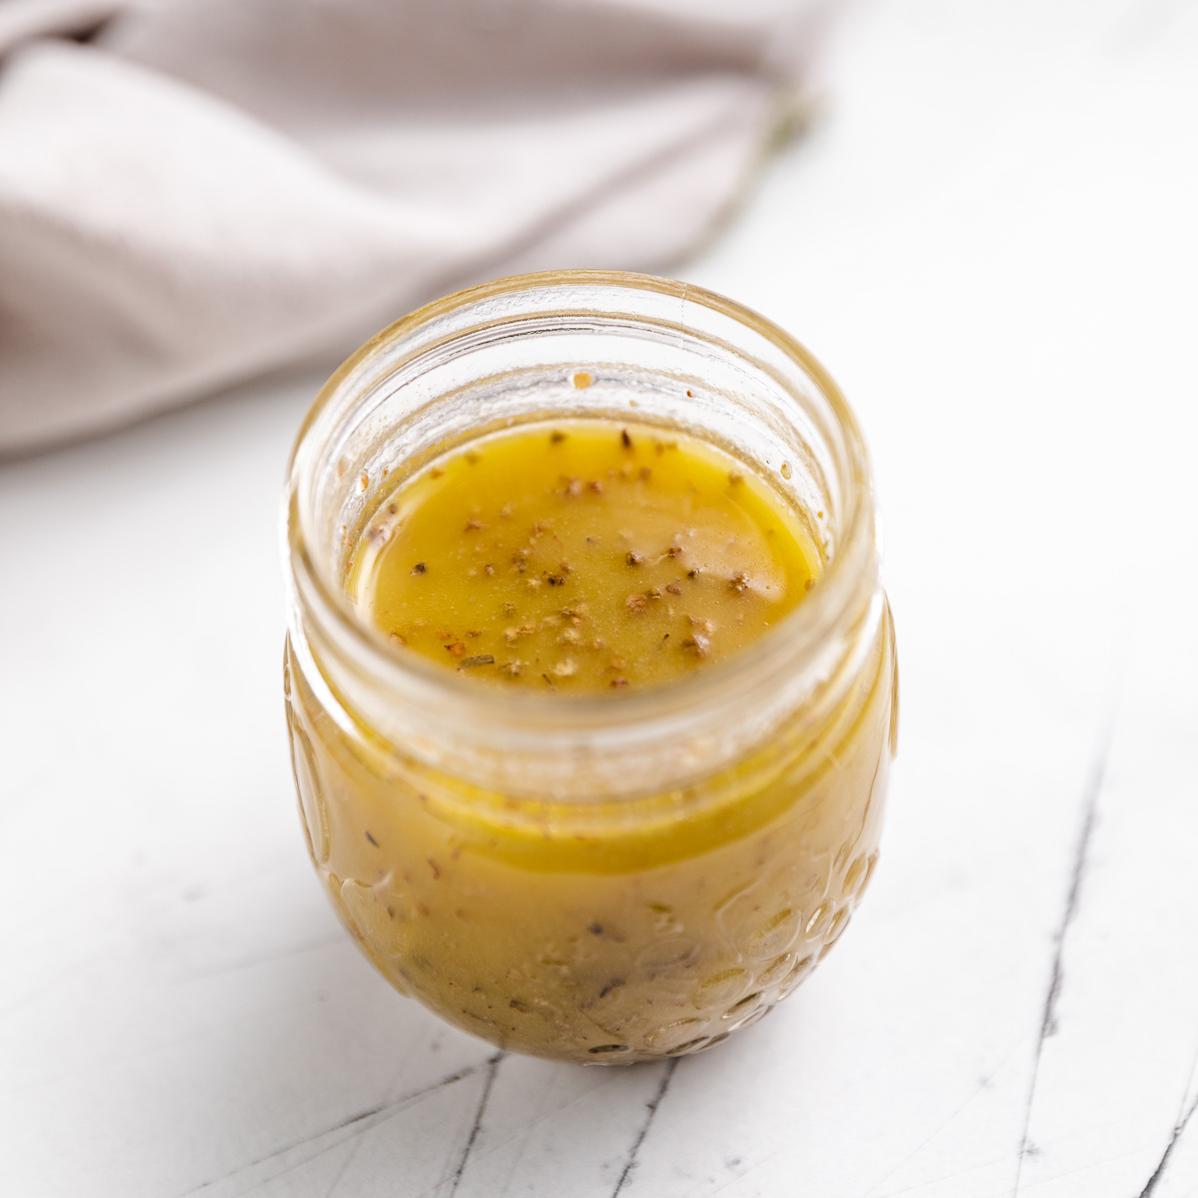  A burst of flavor in every bite with this lemon pepper marinade.